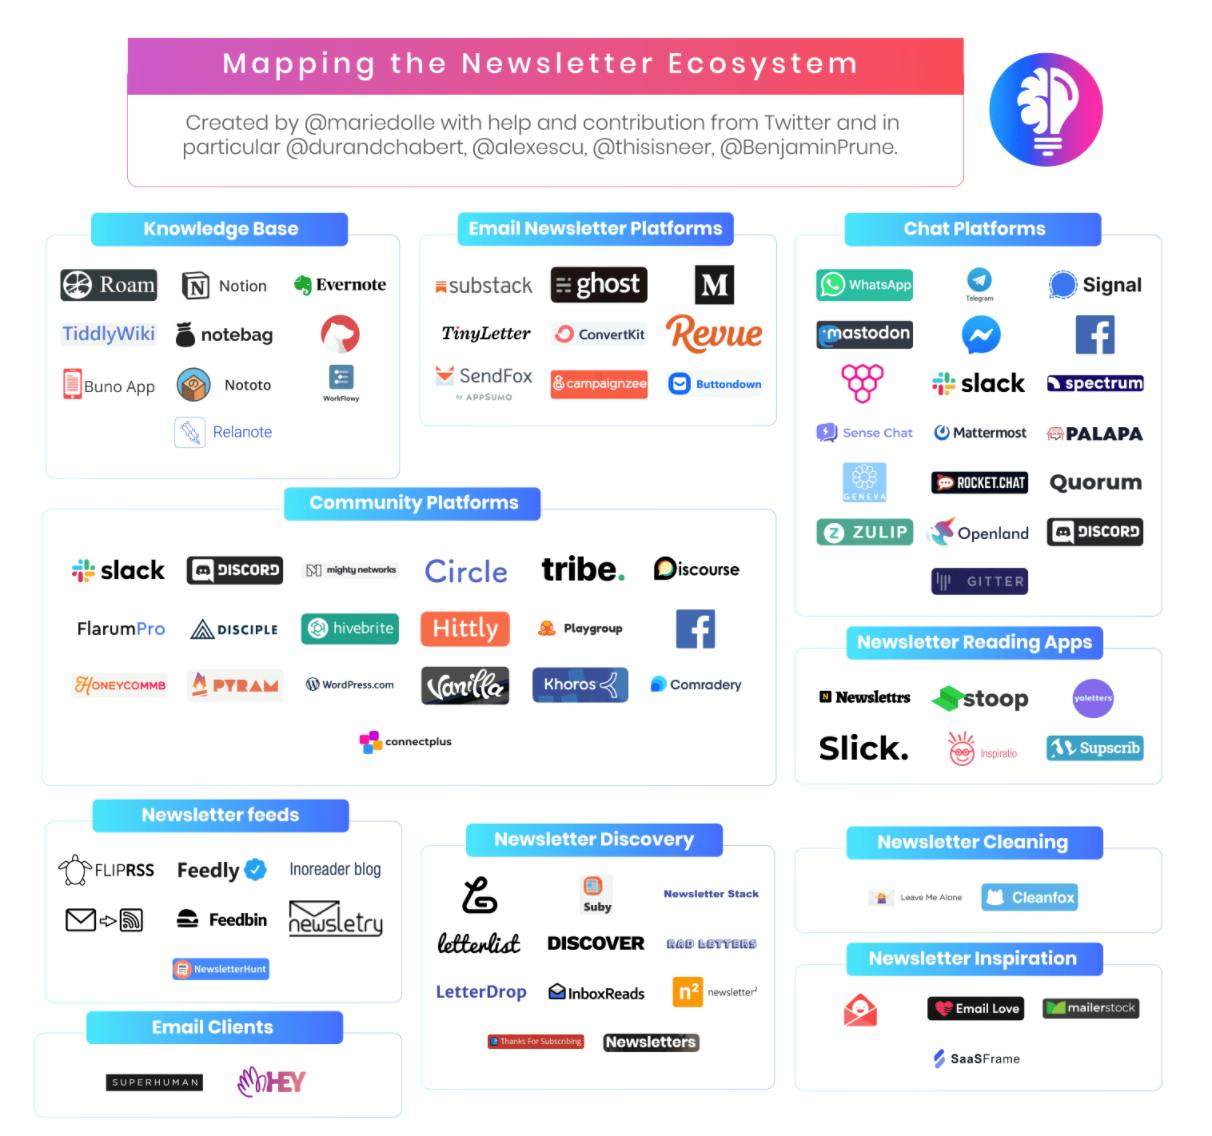 Mapping of the Newsletter Ecosystem